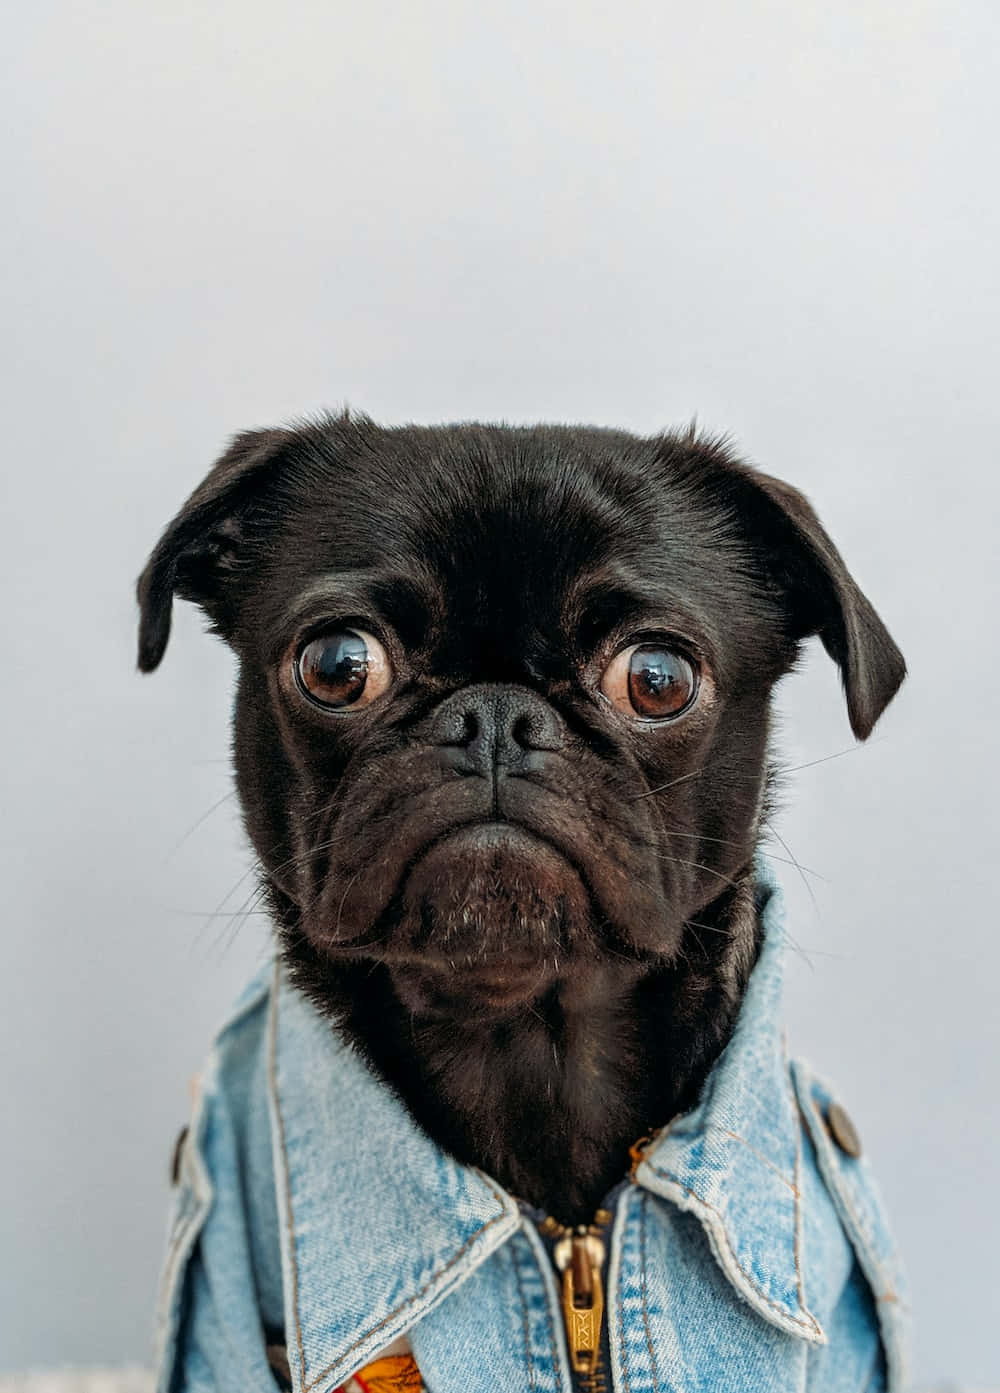 Sad Eyes Silly Pug Pictures